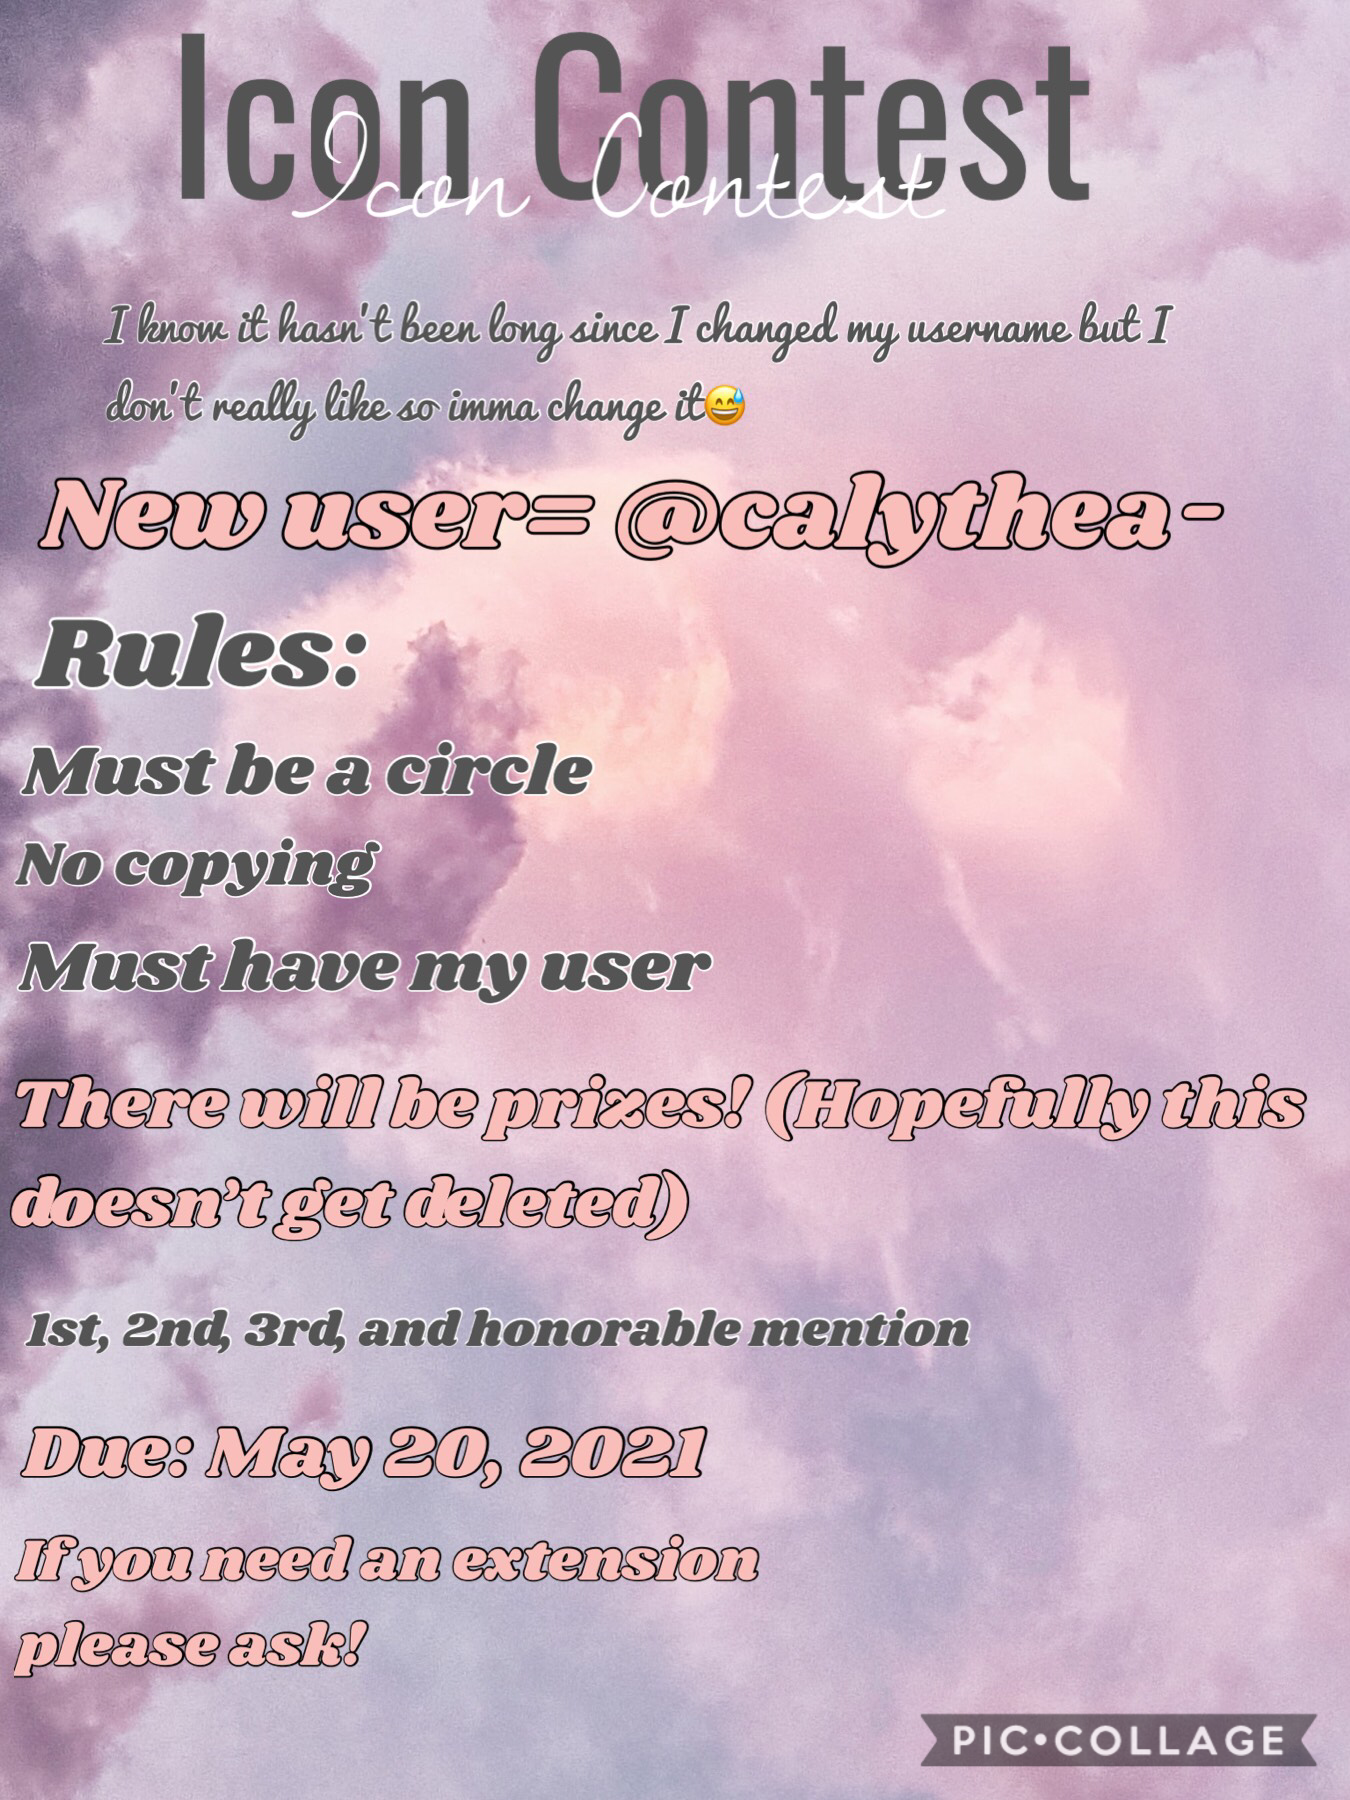 Please join! Good luck and have fun! (I’m not posting anymore this week!)